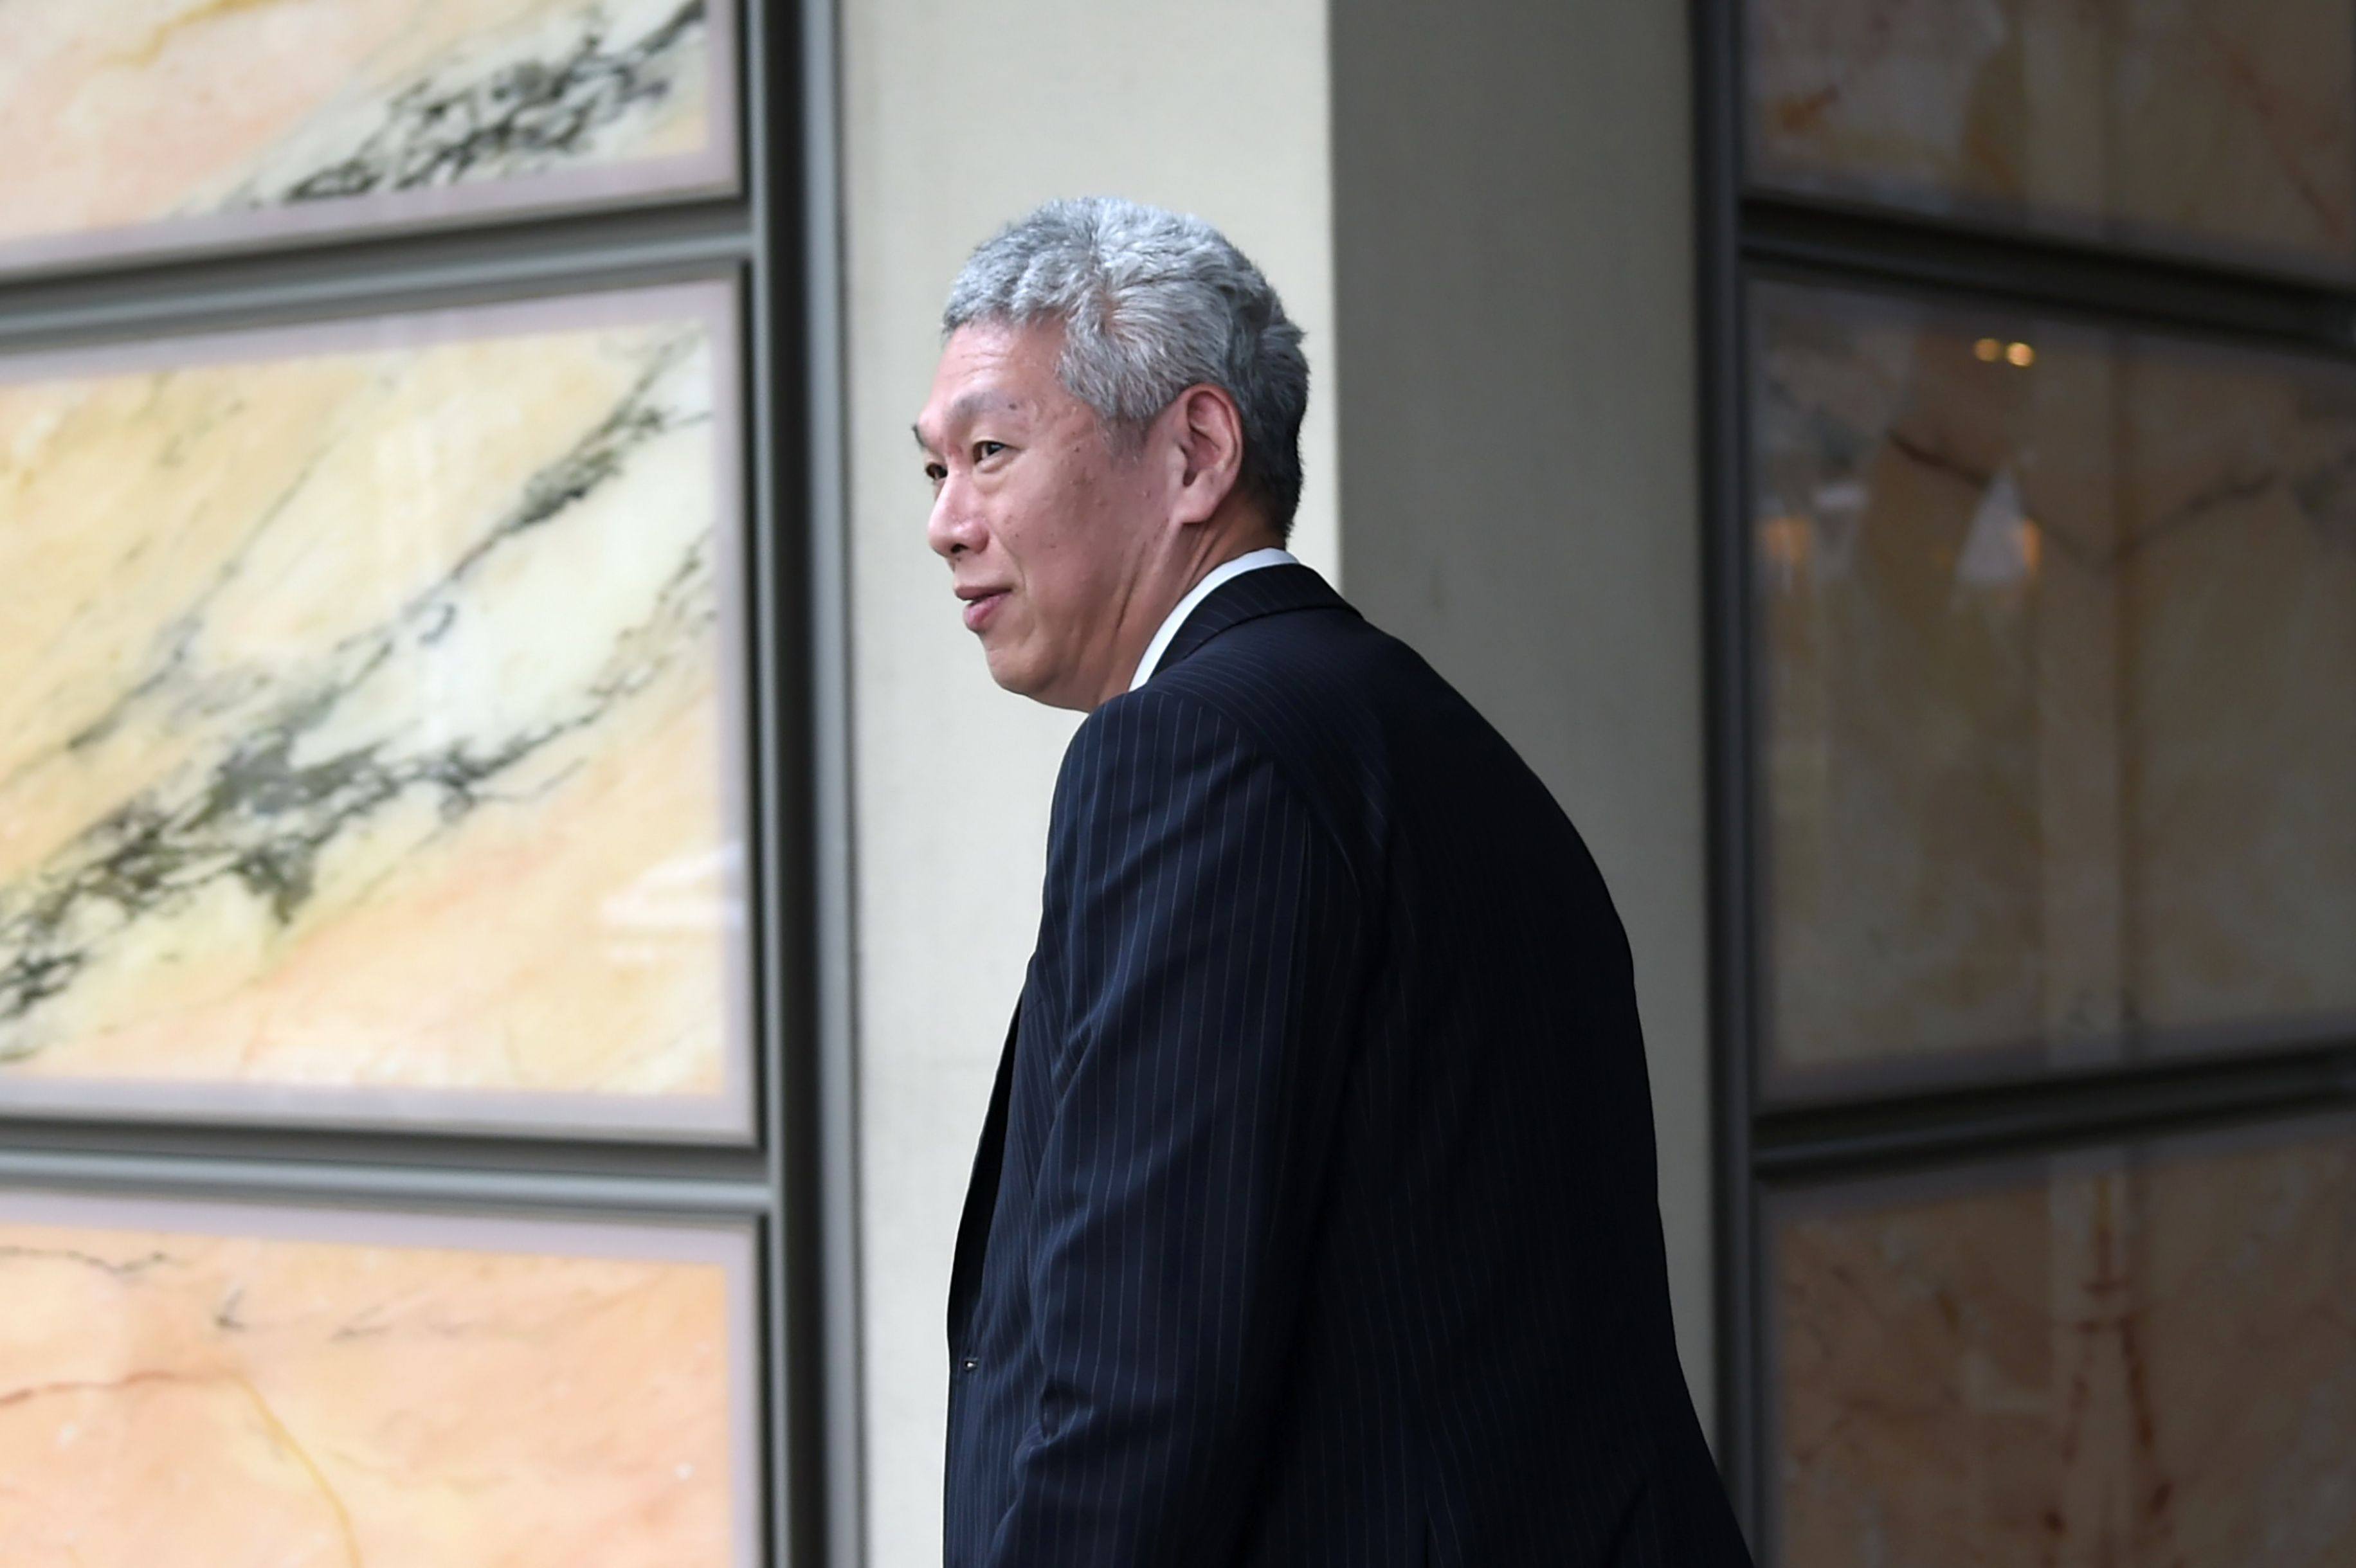 Lee Hsien Yang has been embroiled in a feud with his older brother, Singapore’s Prime Minister Lee Hsien Loong, since 2017. Photo: AFP 